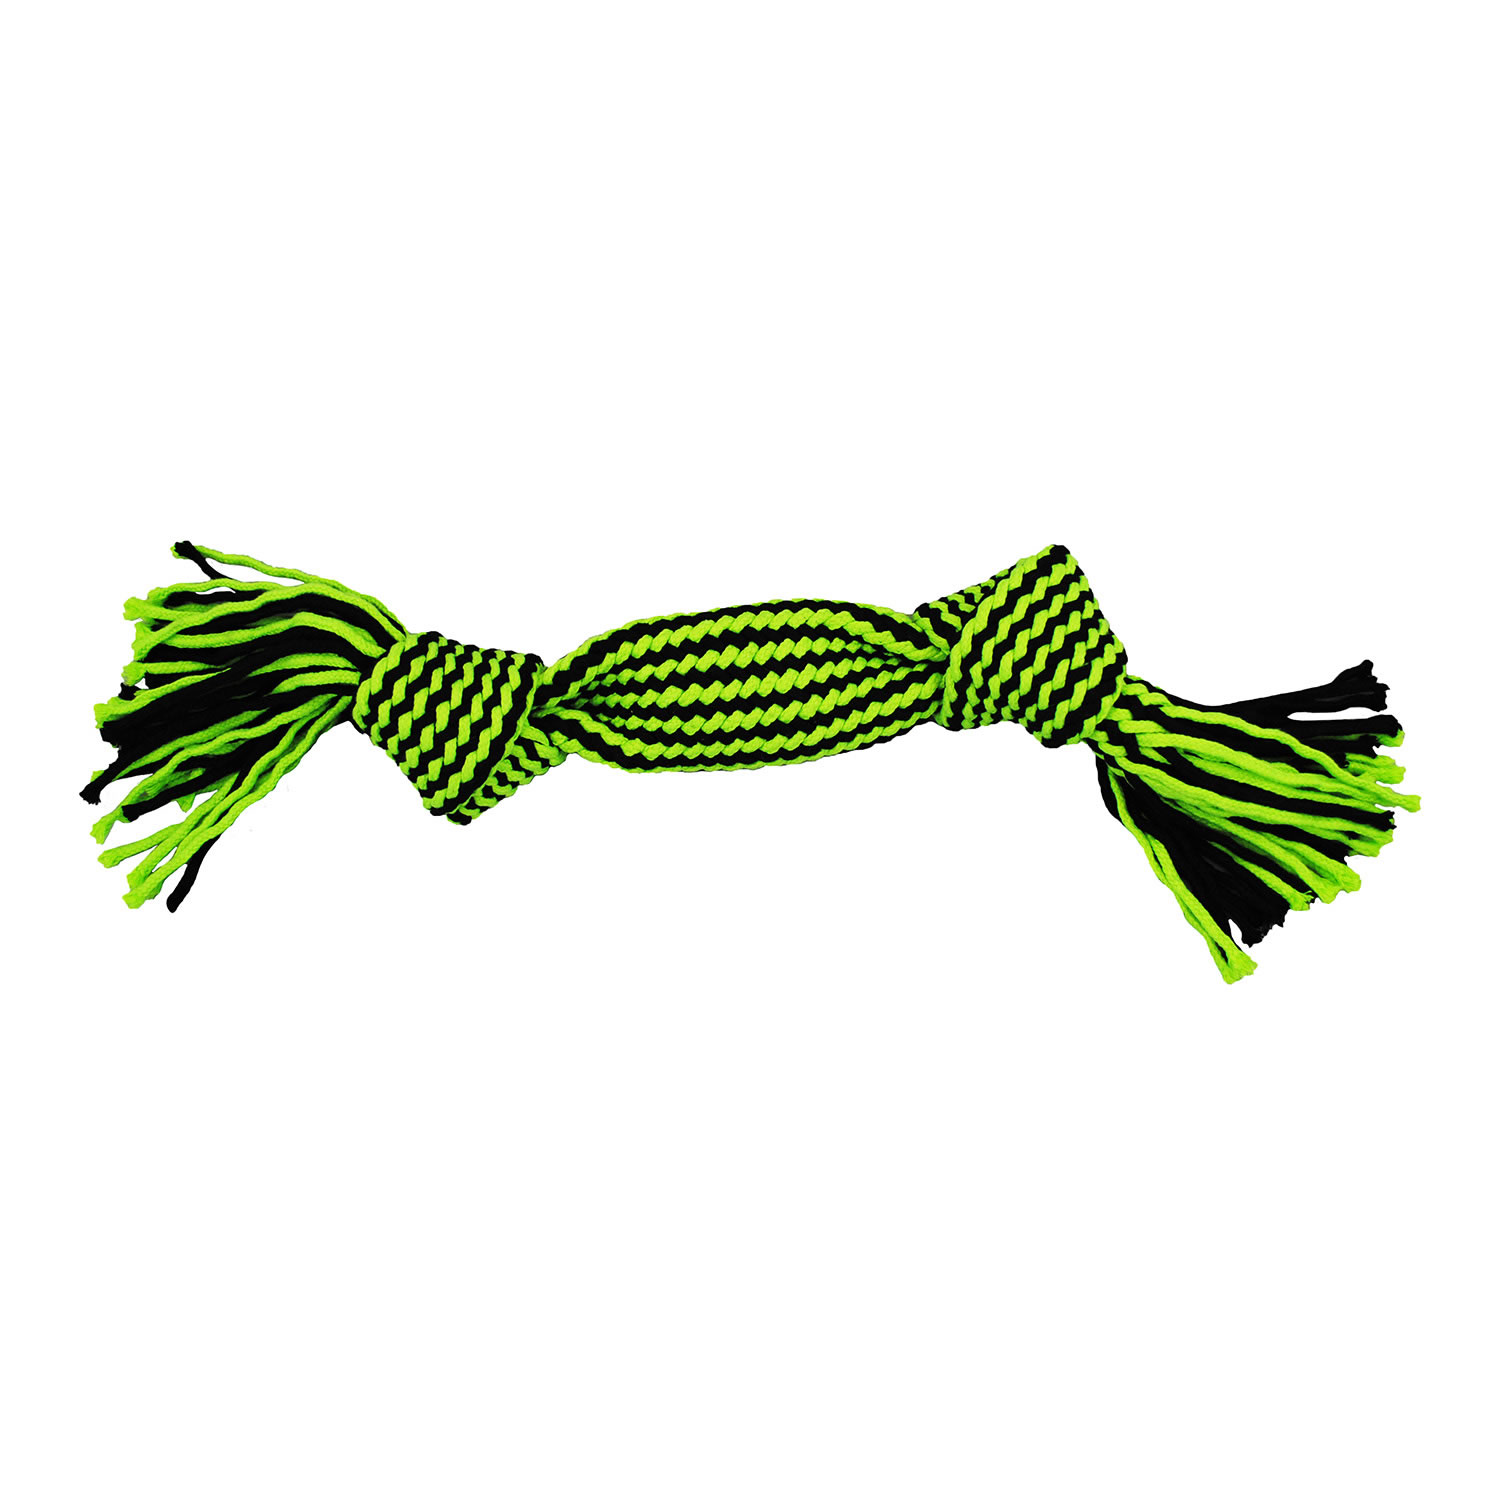 JOLLY PETS KNOT-N-CHEW SQUEAKER ROPE 2 KNOT SMALL/MEDIUM GREEN/BLACK 2 KNOT